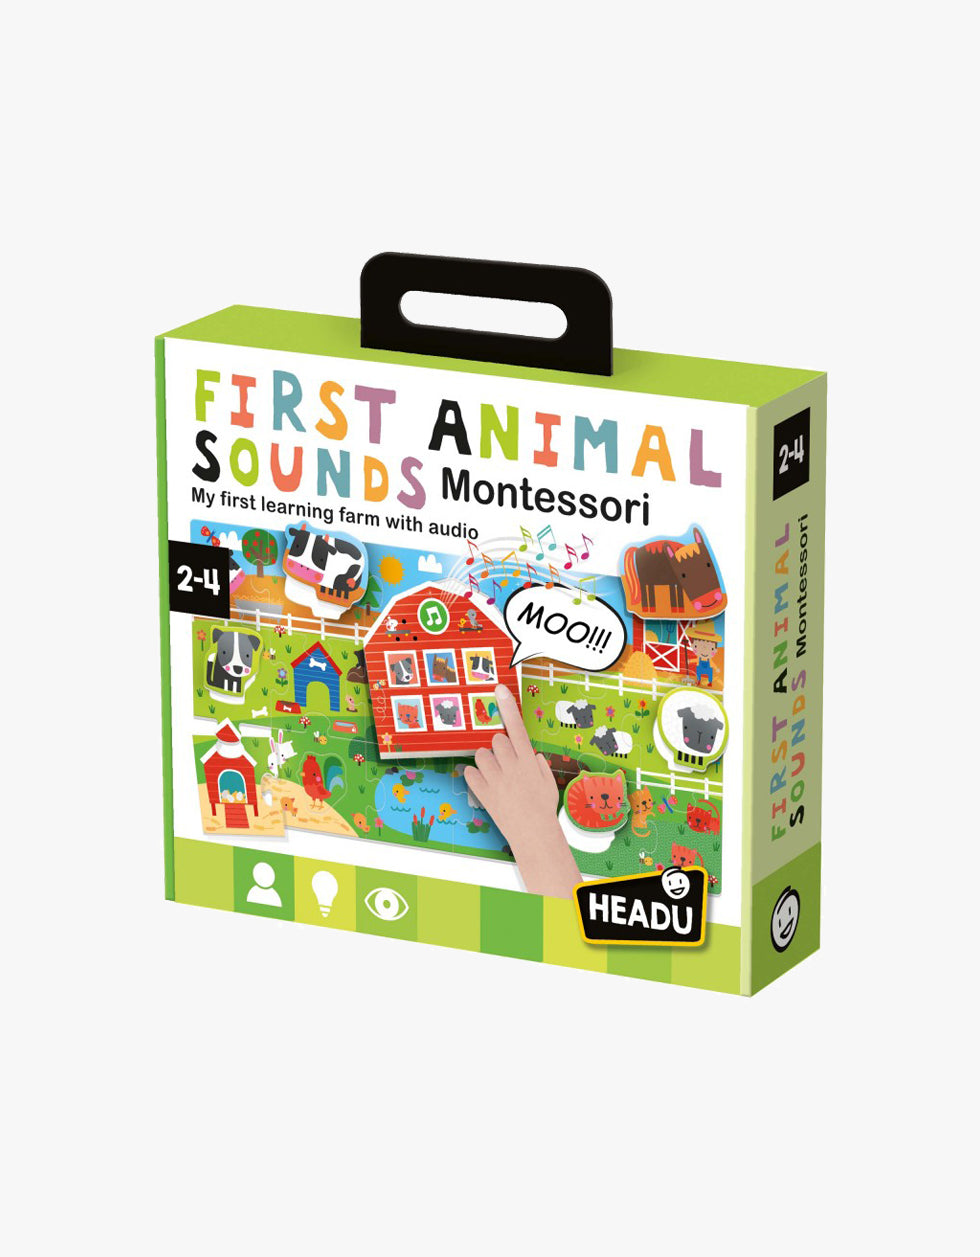 First animal sounds